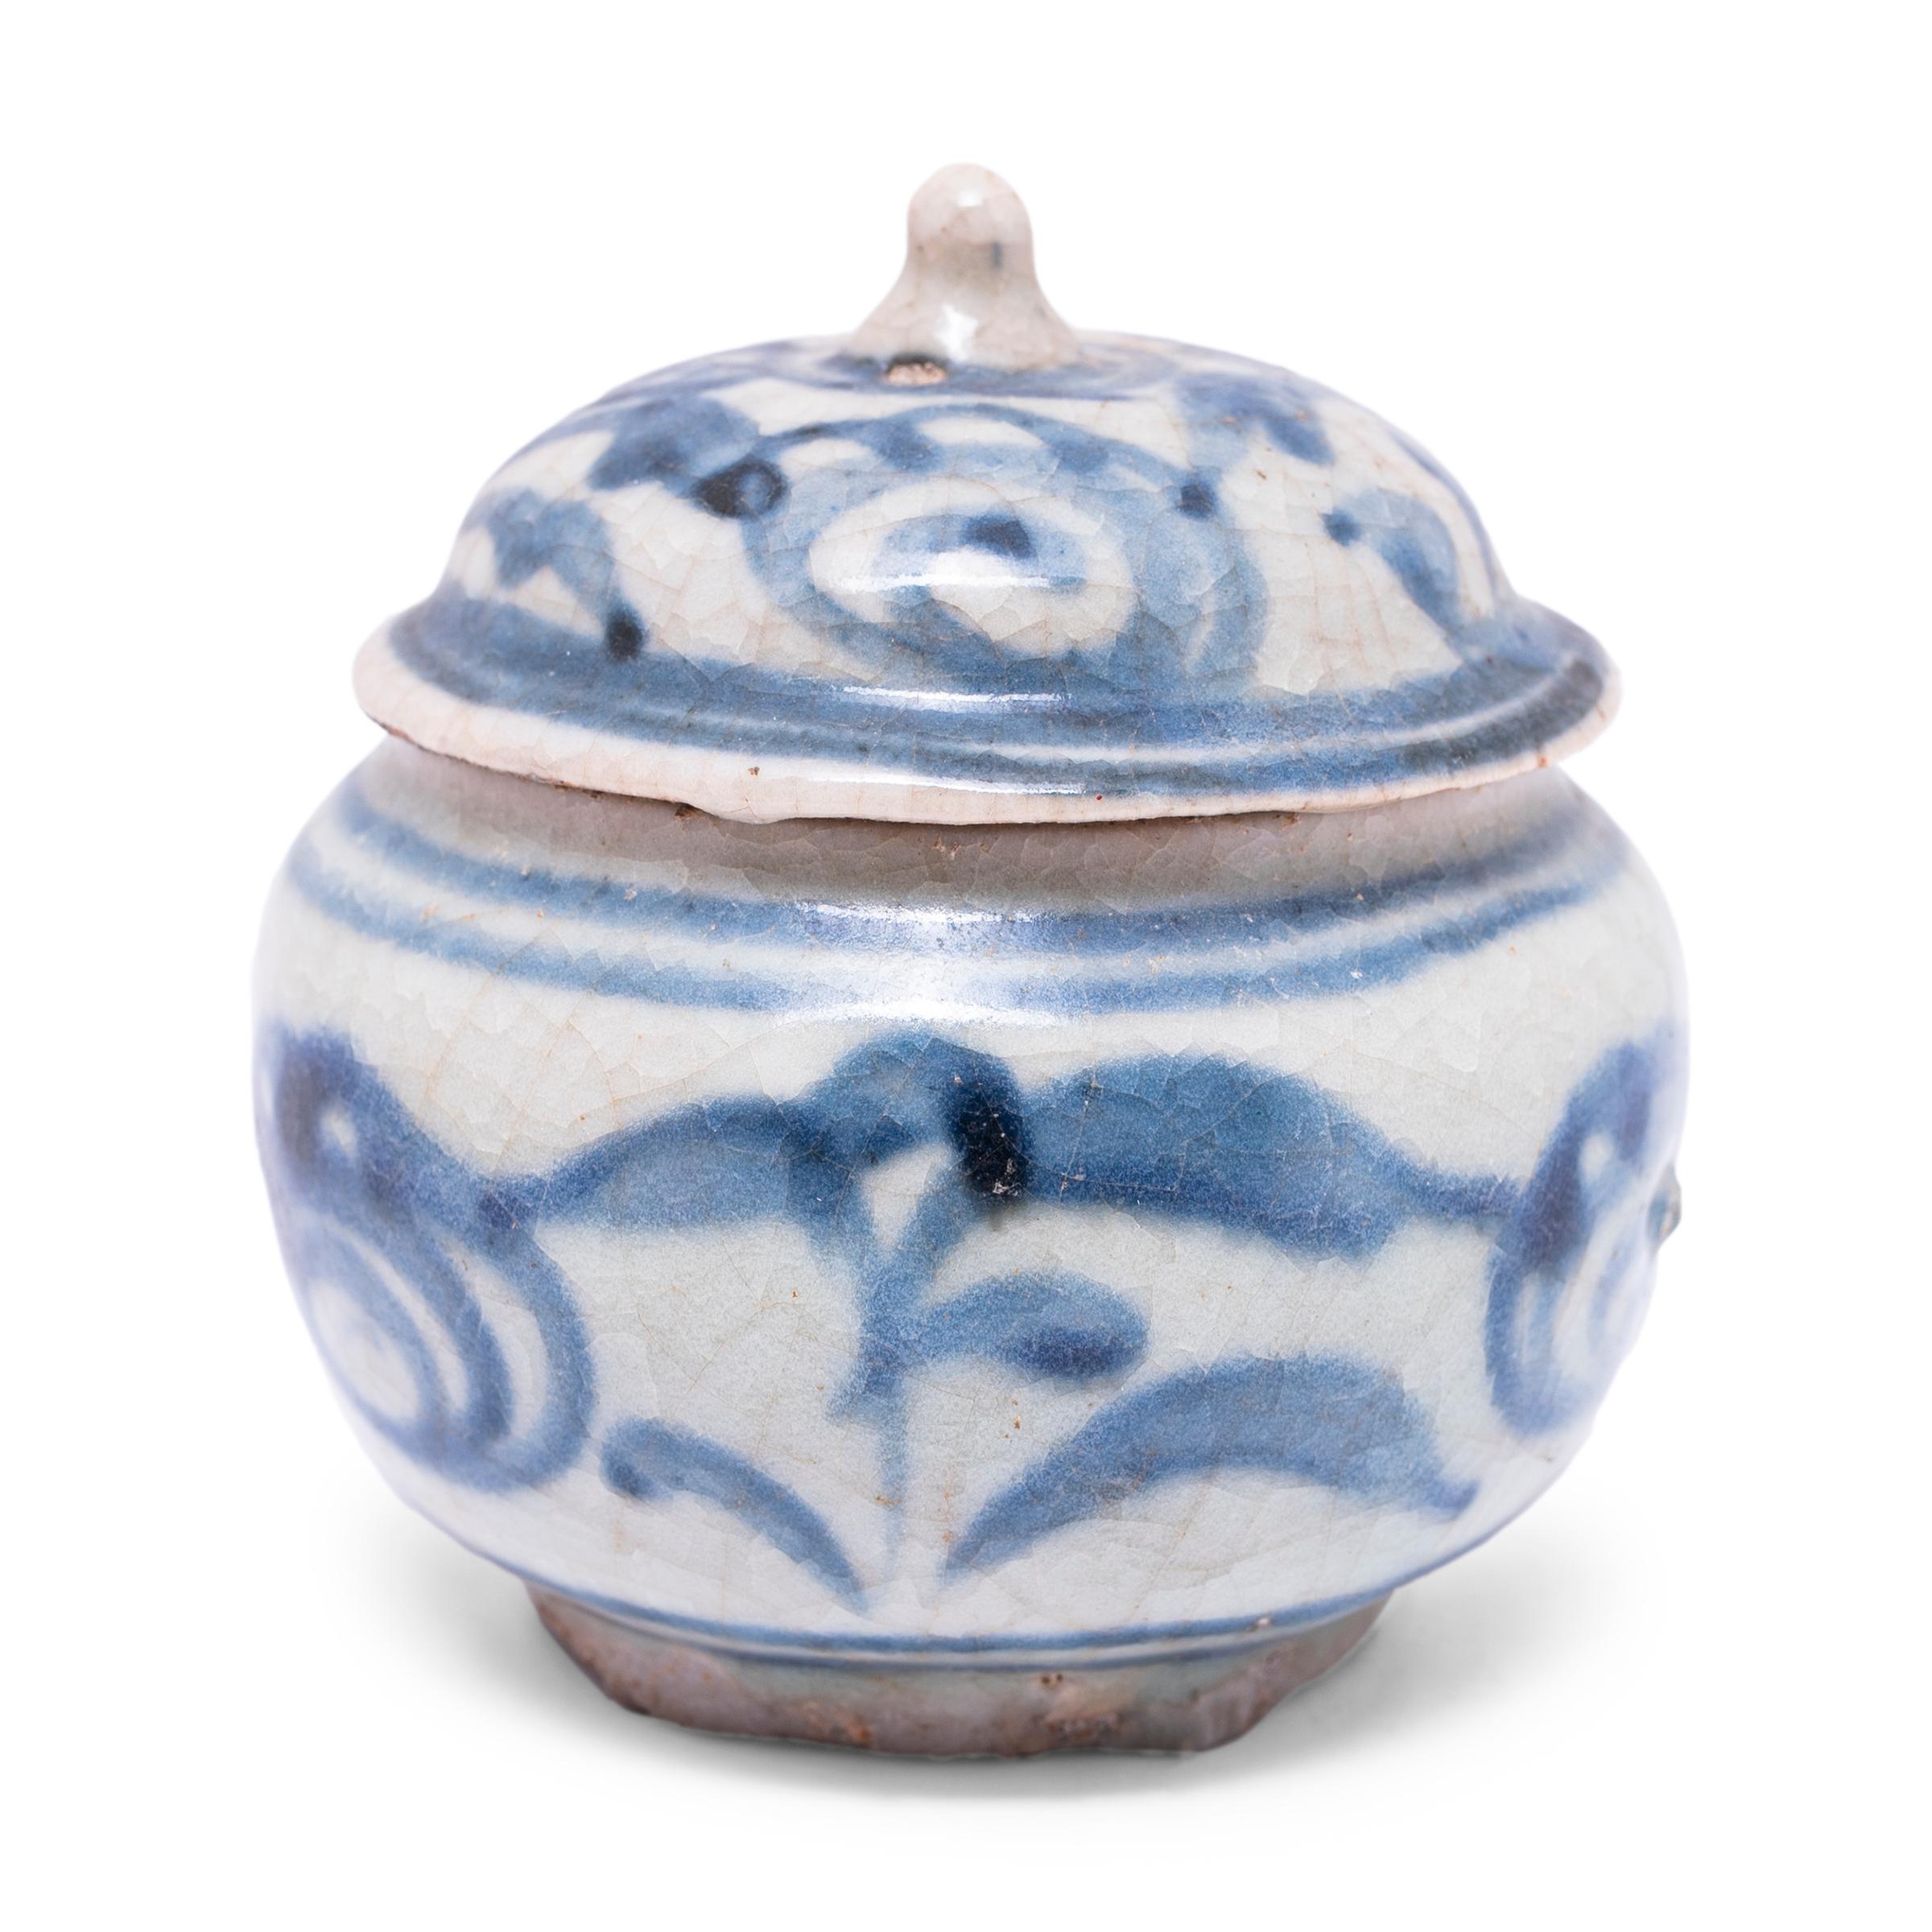 A charming example of provincial blue-and-white pottery, this petite lidded jar from the late Ming dynasty (1368-1644) is cloaked in a cool white underglaze and decorated with expressive blue brushwork of abstract florals. Shaped with a round body